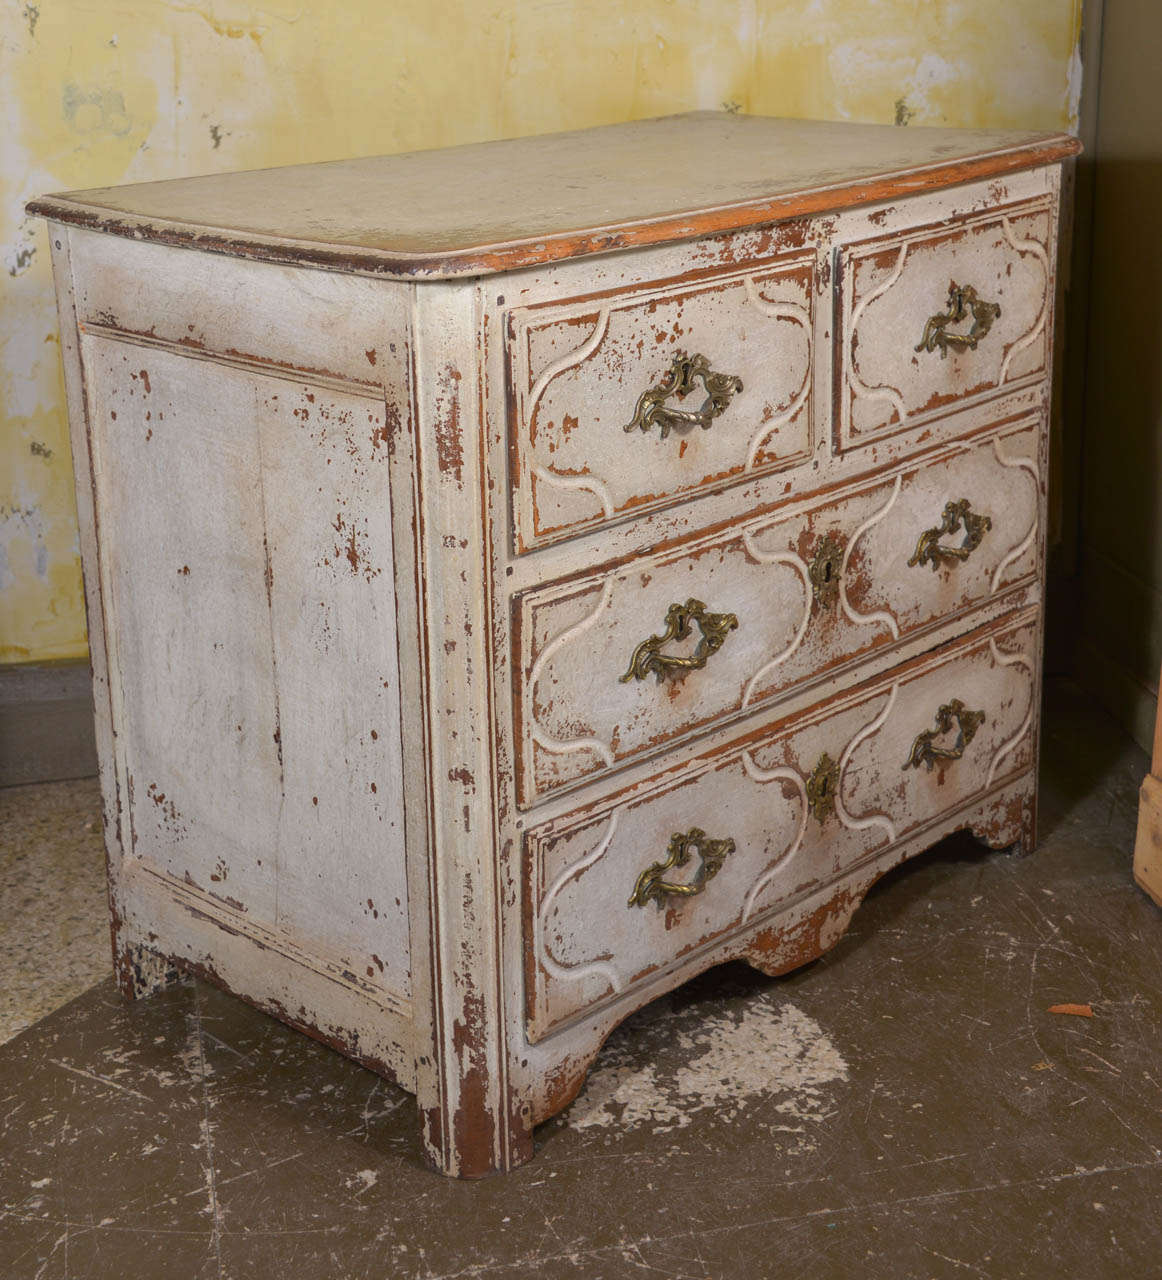 Small scale French Parisian Regence style commode. Great for bedside. In oak with later paint. Original bronze hardware.